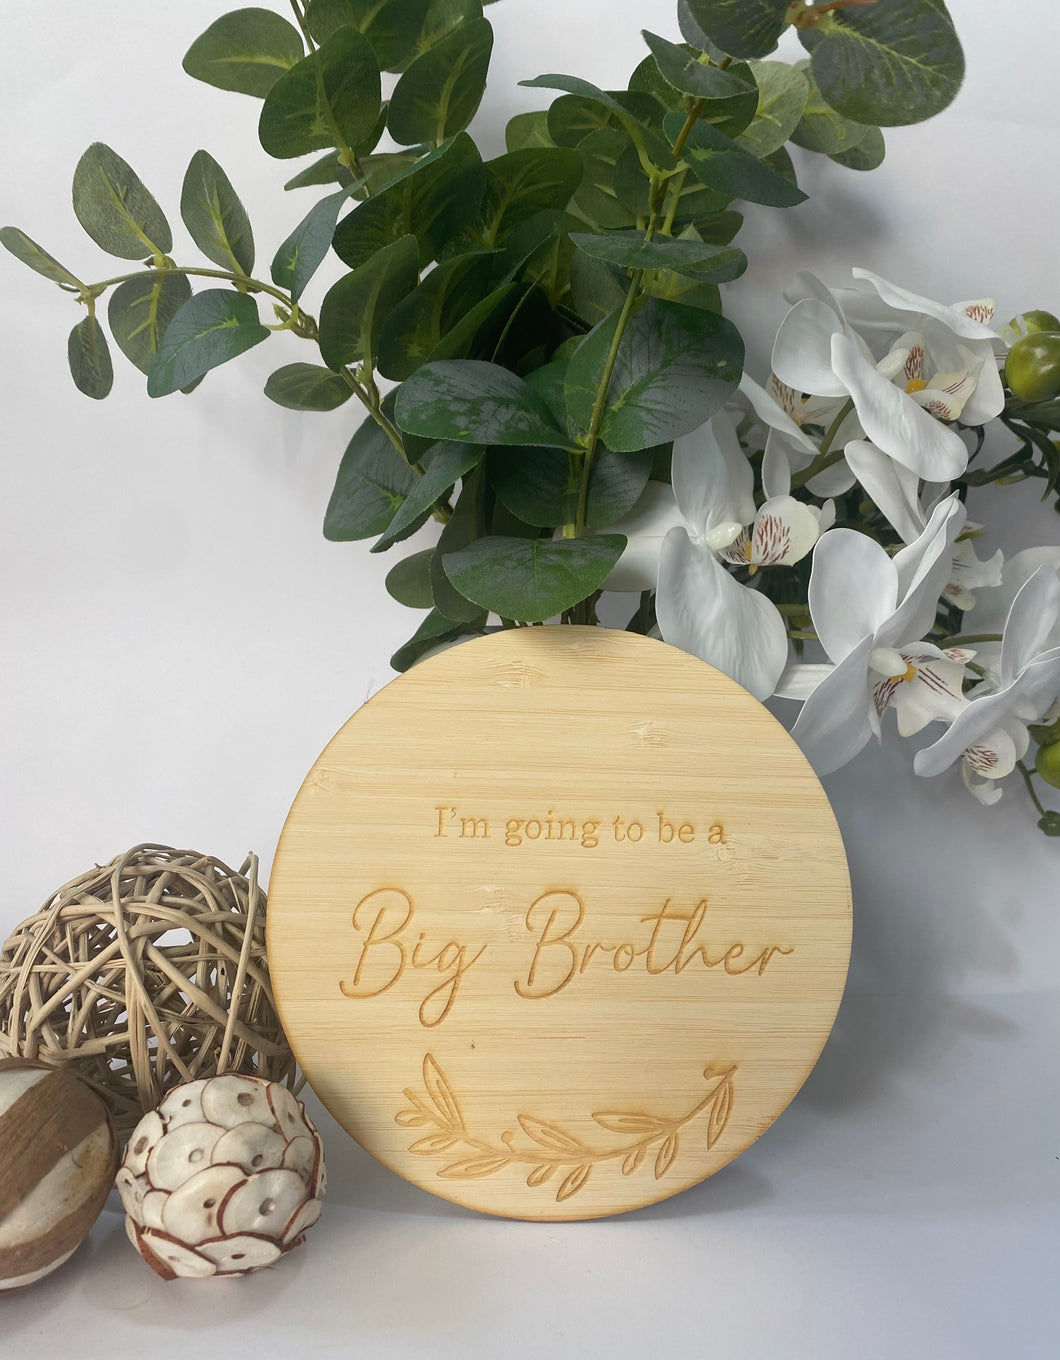 Single Announcement Disc - I'm going to be a Big Brother (Wreath)